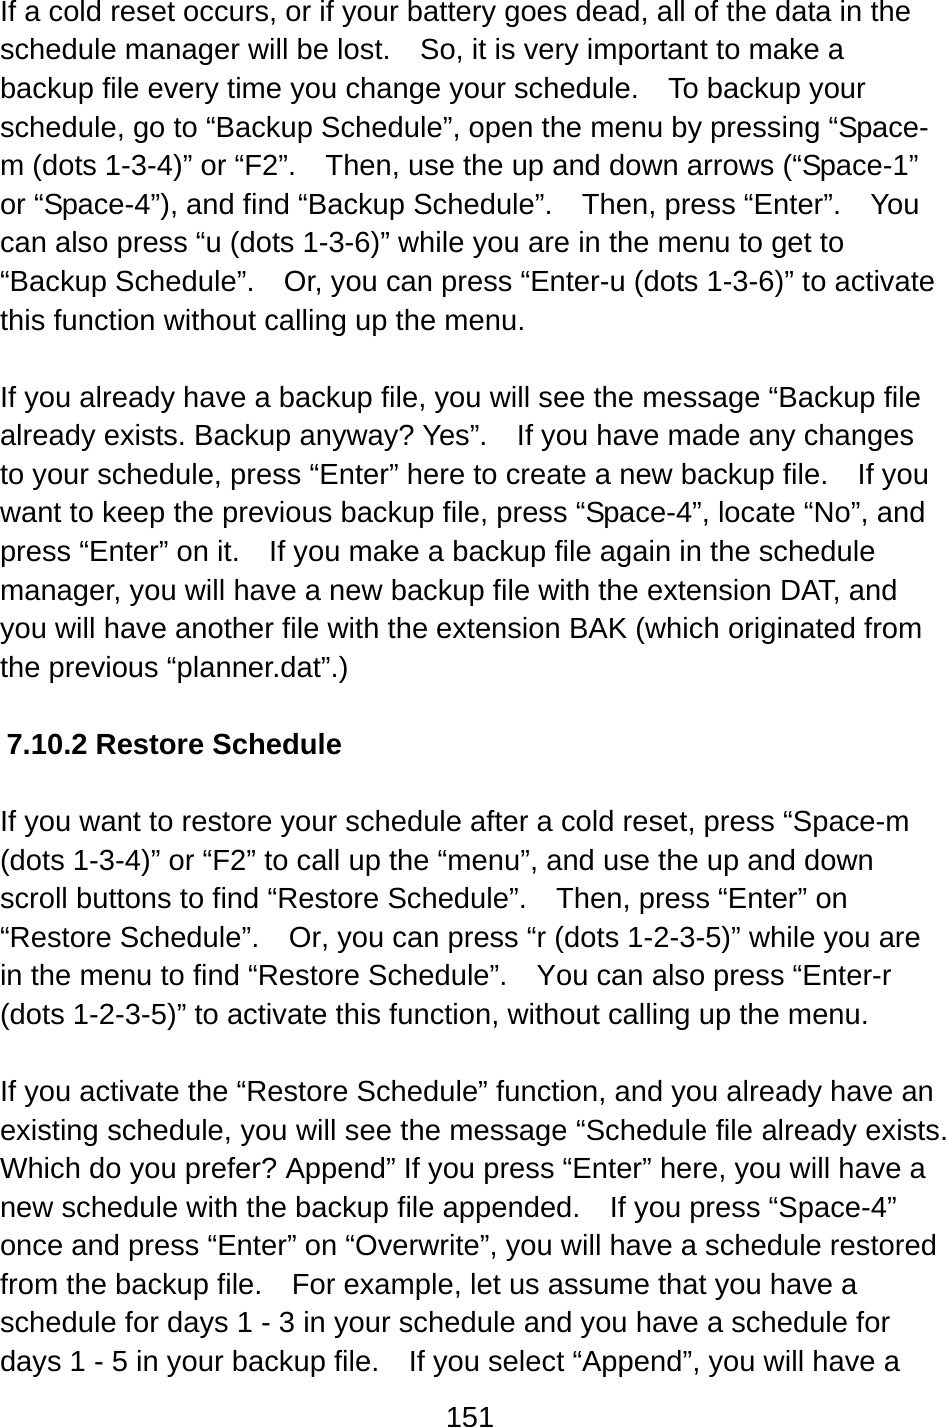 151  If a cold reset occurs, or if your battery goes dead, all of the data in the schedule manager will be lost.    So, it is very important to make a backup file every time you change your schedule.  To backup your schedule, go to “Backup Schedule”, open the menu by pressing “Space-m (dots 1-3-4)” or “F2”.    Then, use the up and down arrows (“Space-1” or “Space-4”), and find “Backup Schedule”.    Then, press “Enter”.    You can also press “u (dots 1-3-6)” while you are in the menu to get to “Backup Schedule”.    Or, you can press “Enter-u (dots 1-3-6)” to activate this function without calling up the menu.  If you already have a backup file, you will see the message “Backup file already exists. Backup anyway? Yes”.    If you have made any changes to your schedule, press “Enter” here to create a new backup file.    If you want to keep the previous backup file, press “Space-4”, locate “No”, and press “Enter” on it.    If you make a backup file again in the schedule manager, you will have a new backup file with the extension DAT, and you will have another file with the extension BAK (which originated from the previous “planner.dat”.)  7.10.2 Restore Schedule  If you want to restore your schedule after a cold reset, press “Space-m (dots 1-3-4)” or “F2” to call up the “menu”, and use the up and down scroll buttons to find “Restore Schedule”.    Then, press “Enter” on “Restore Schedule”.    Or, you can press “r (dots 1-2-3-5)” while you are in the menu to find “Restore Schedule”.  You can also press “Enter-r (dots 1-2-3-5)” to activate this function, without calling up the menu.  If you activate the “Restore Schedule” function, and you already have an existing schedule, you will see the message “Schedule file already exists. Which do you prefer? Append” If you press “Enter” here, you will have a new schedule with the backup file appended.  If you press “Space-4” once and press “Enter” on “Overwrite”, you will have a schedule restored from the backup file.    For example, let us assume that you have a schedule for days 1 - 3 in your schedule and you have a schedule for days 1 - 5 in your backup file.    If you select “Append”, you will have a 